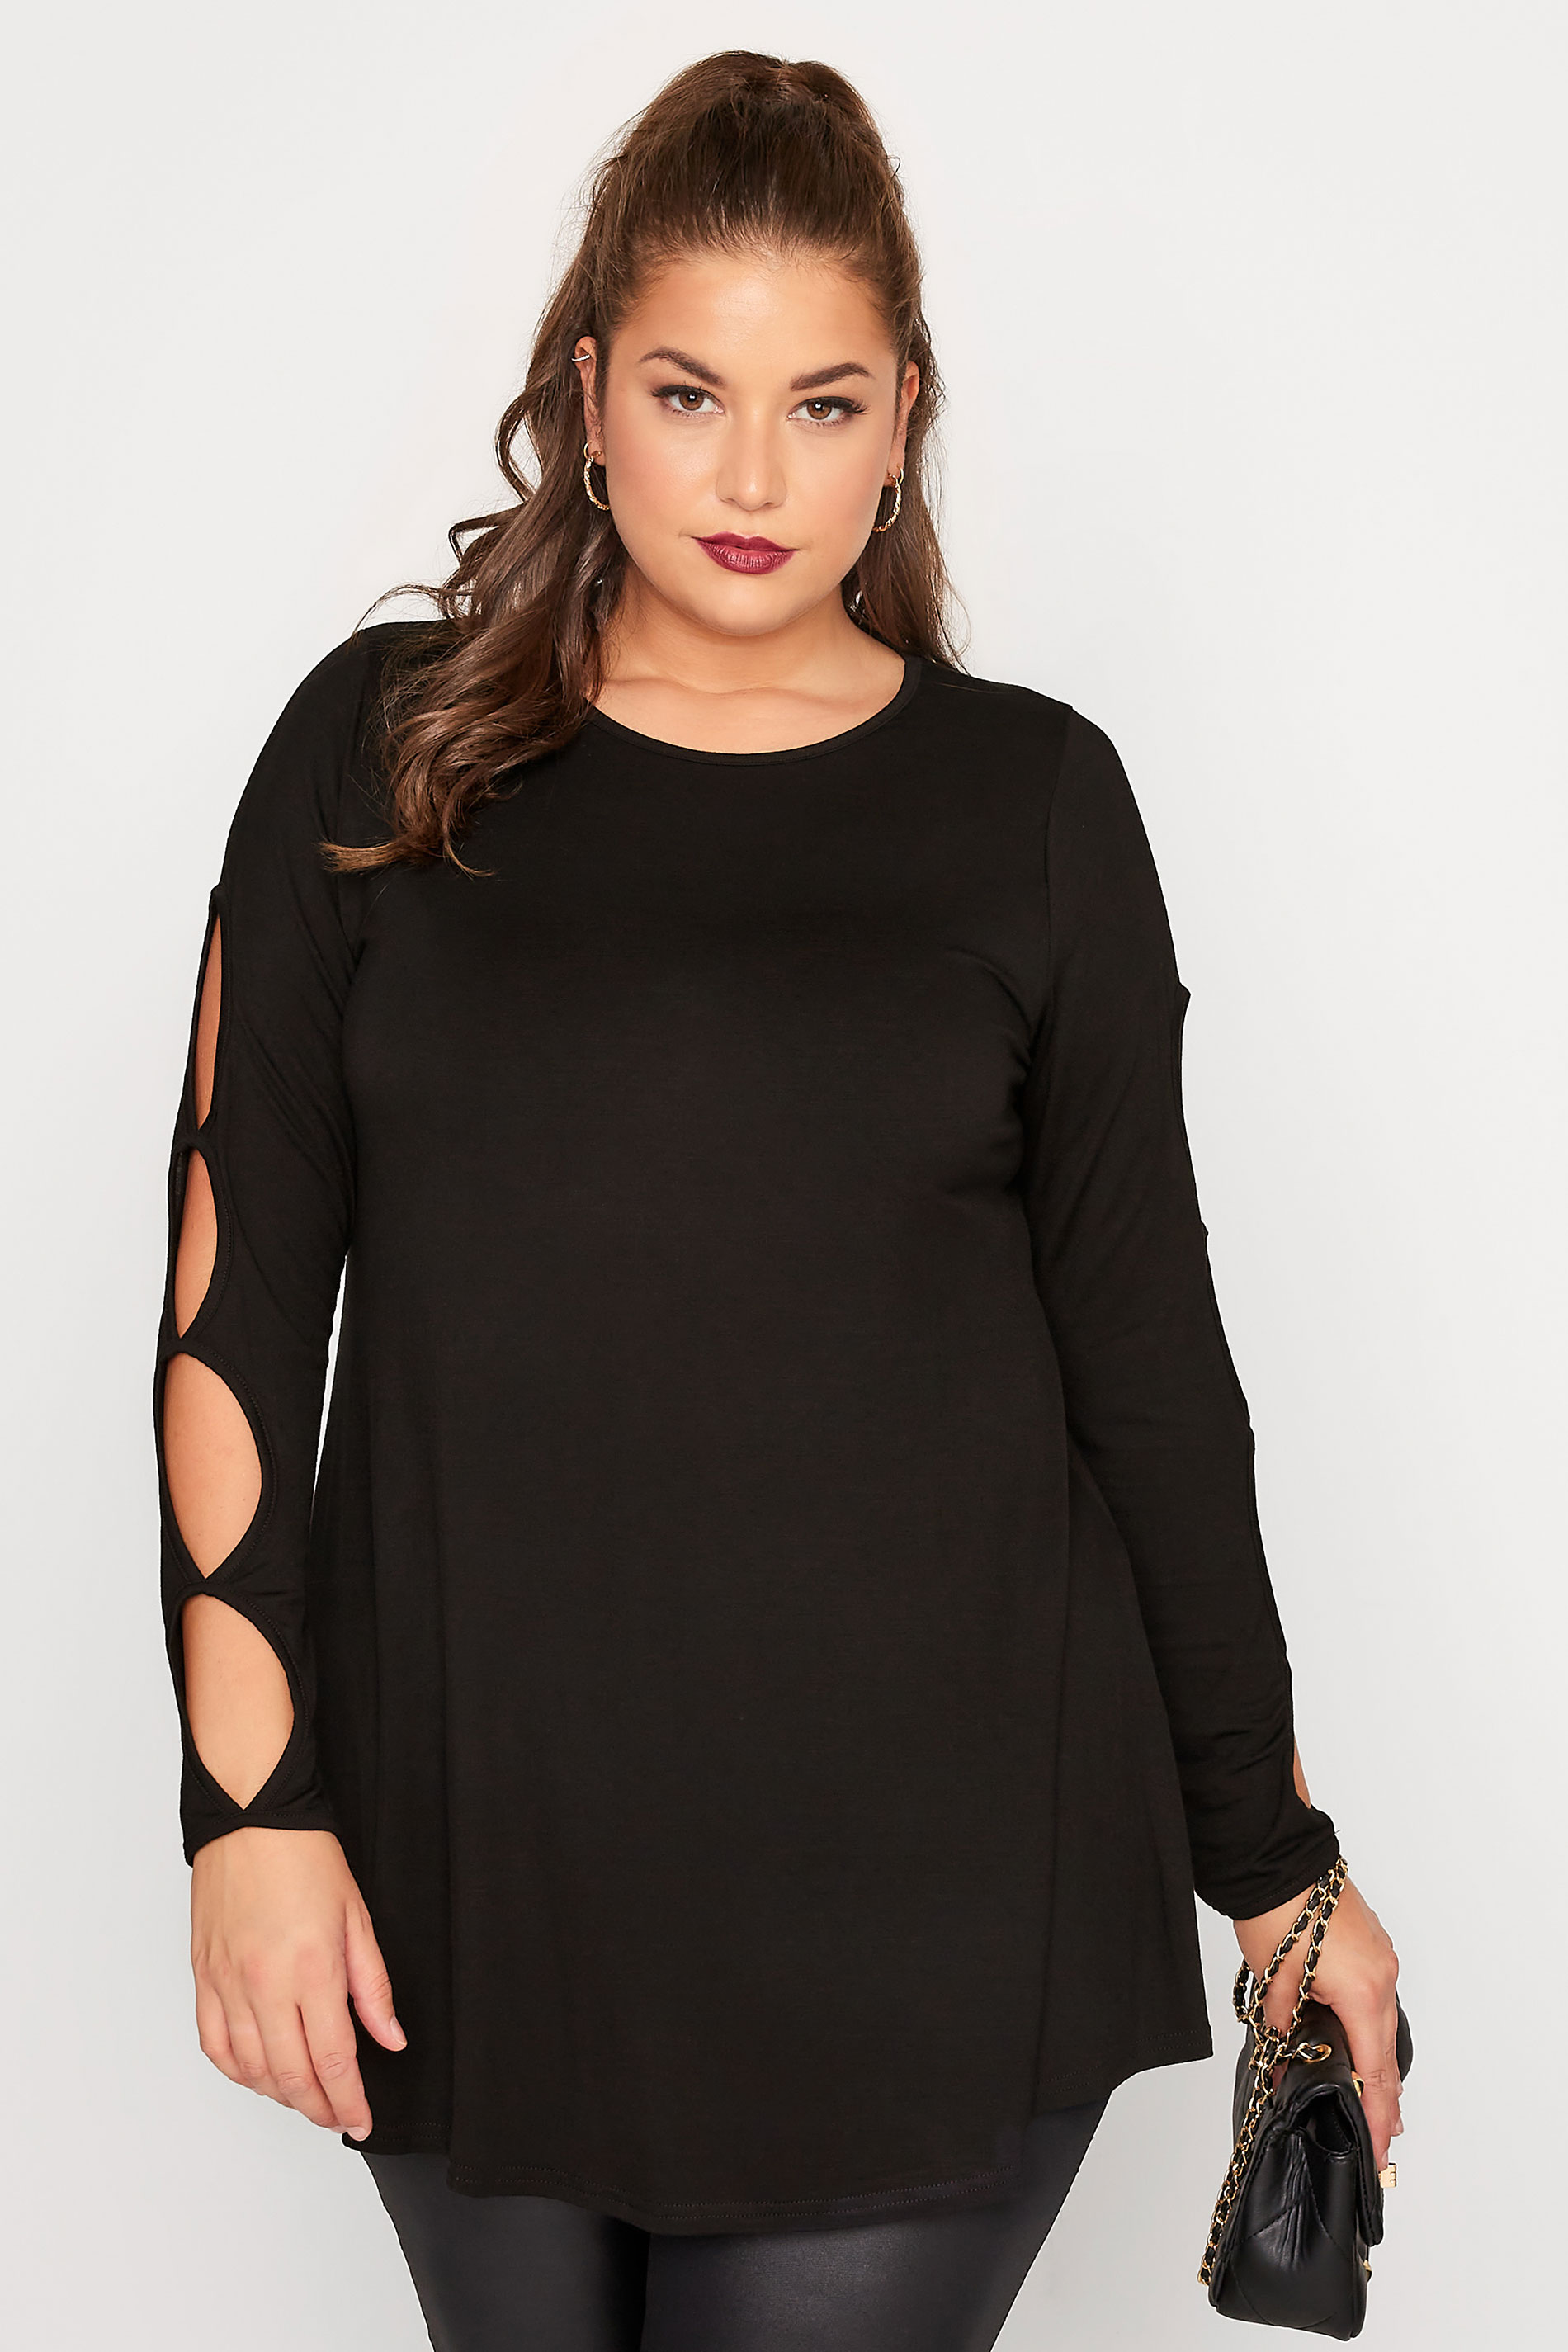 LIMITED COLLECTION Plus Size Black Cut Out Sleeve Top | Yours Clothing 1